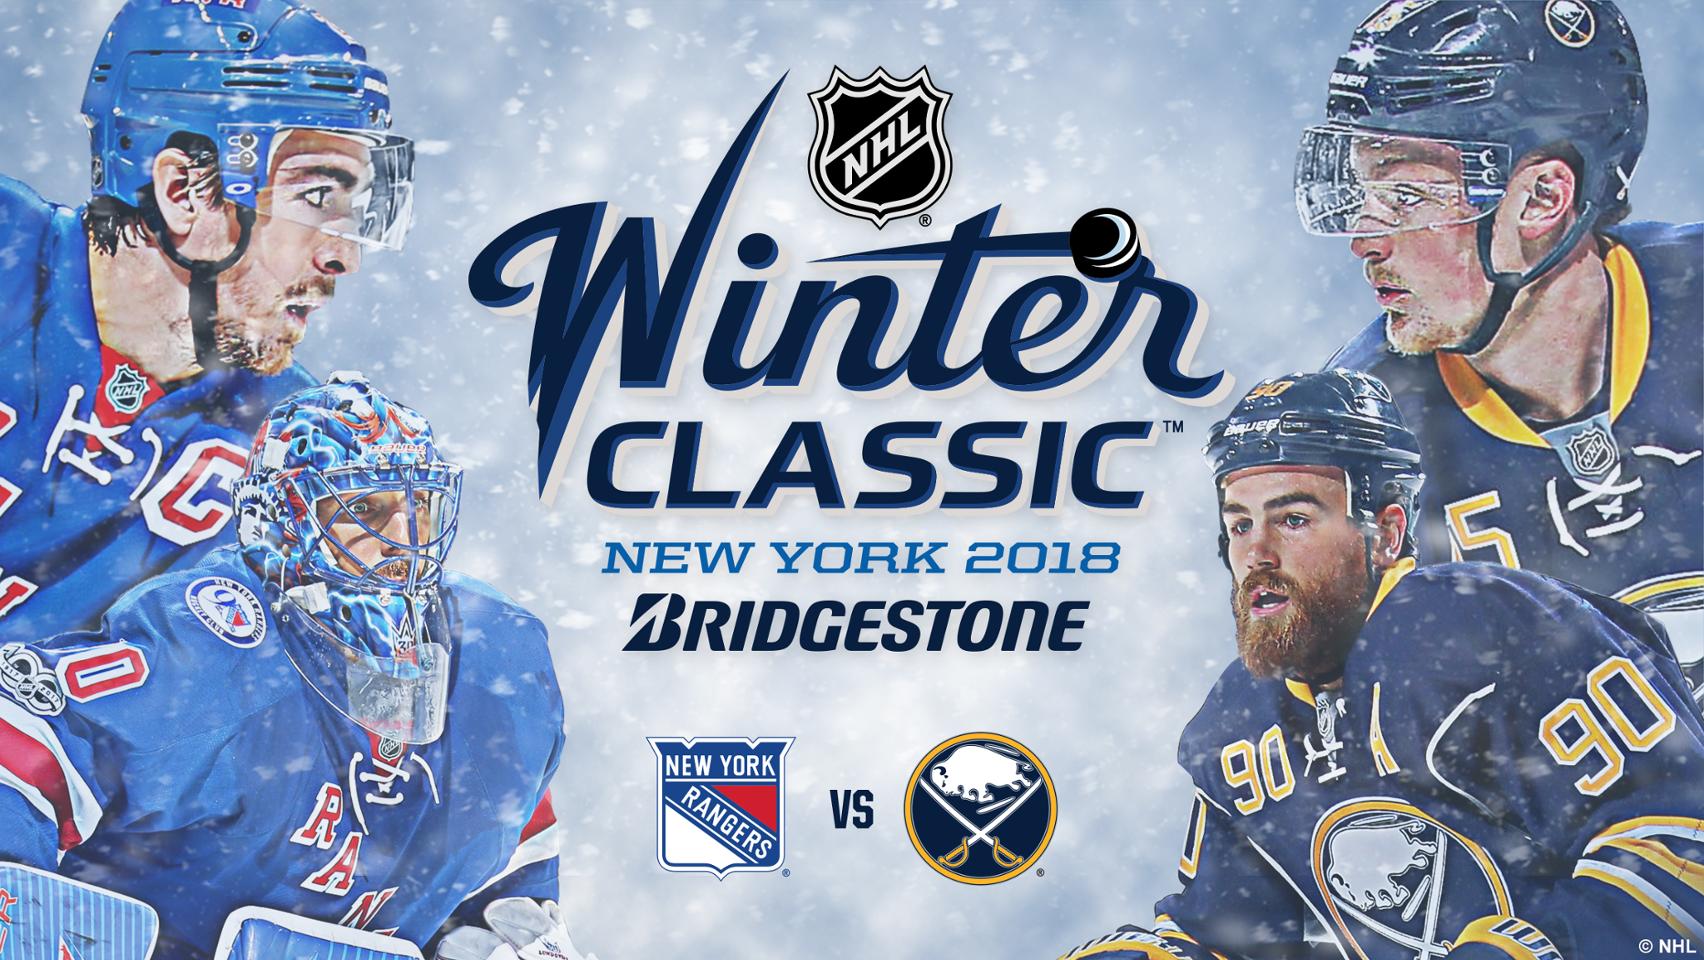 Rangers' depth on display early in 2018 Winter Classic - NBC Sports